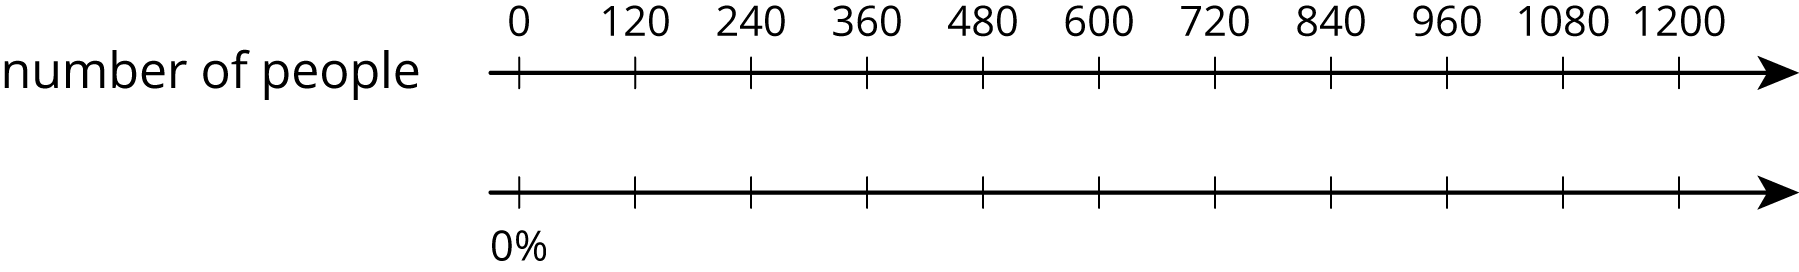 A double number line for “number of people” with 11 evenly spaced tick marks. The top number line, starting with the first tick mark, has the numbers zero, 120, 240, 360, 480, 600, 720, 840, 960, 1080 and 1200 labeled. On the bottom number line zero percent is on the first tick mark and the remaining tick marks are not labeled.